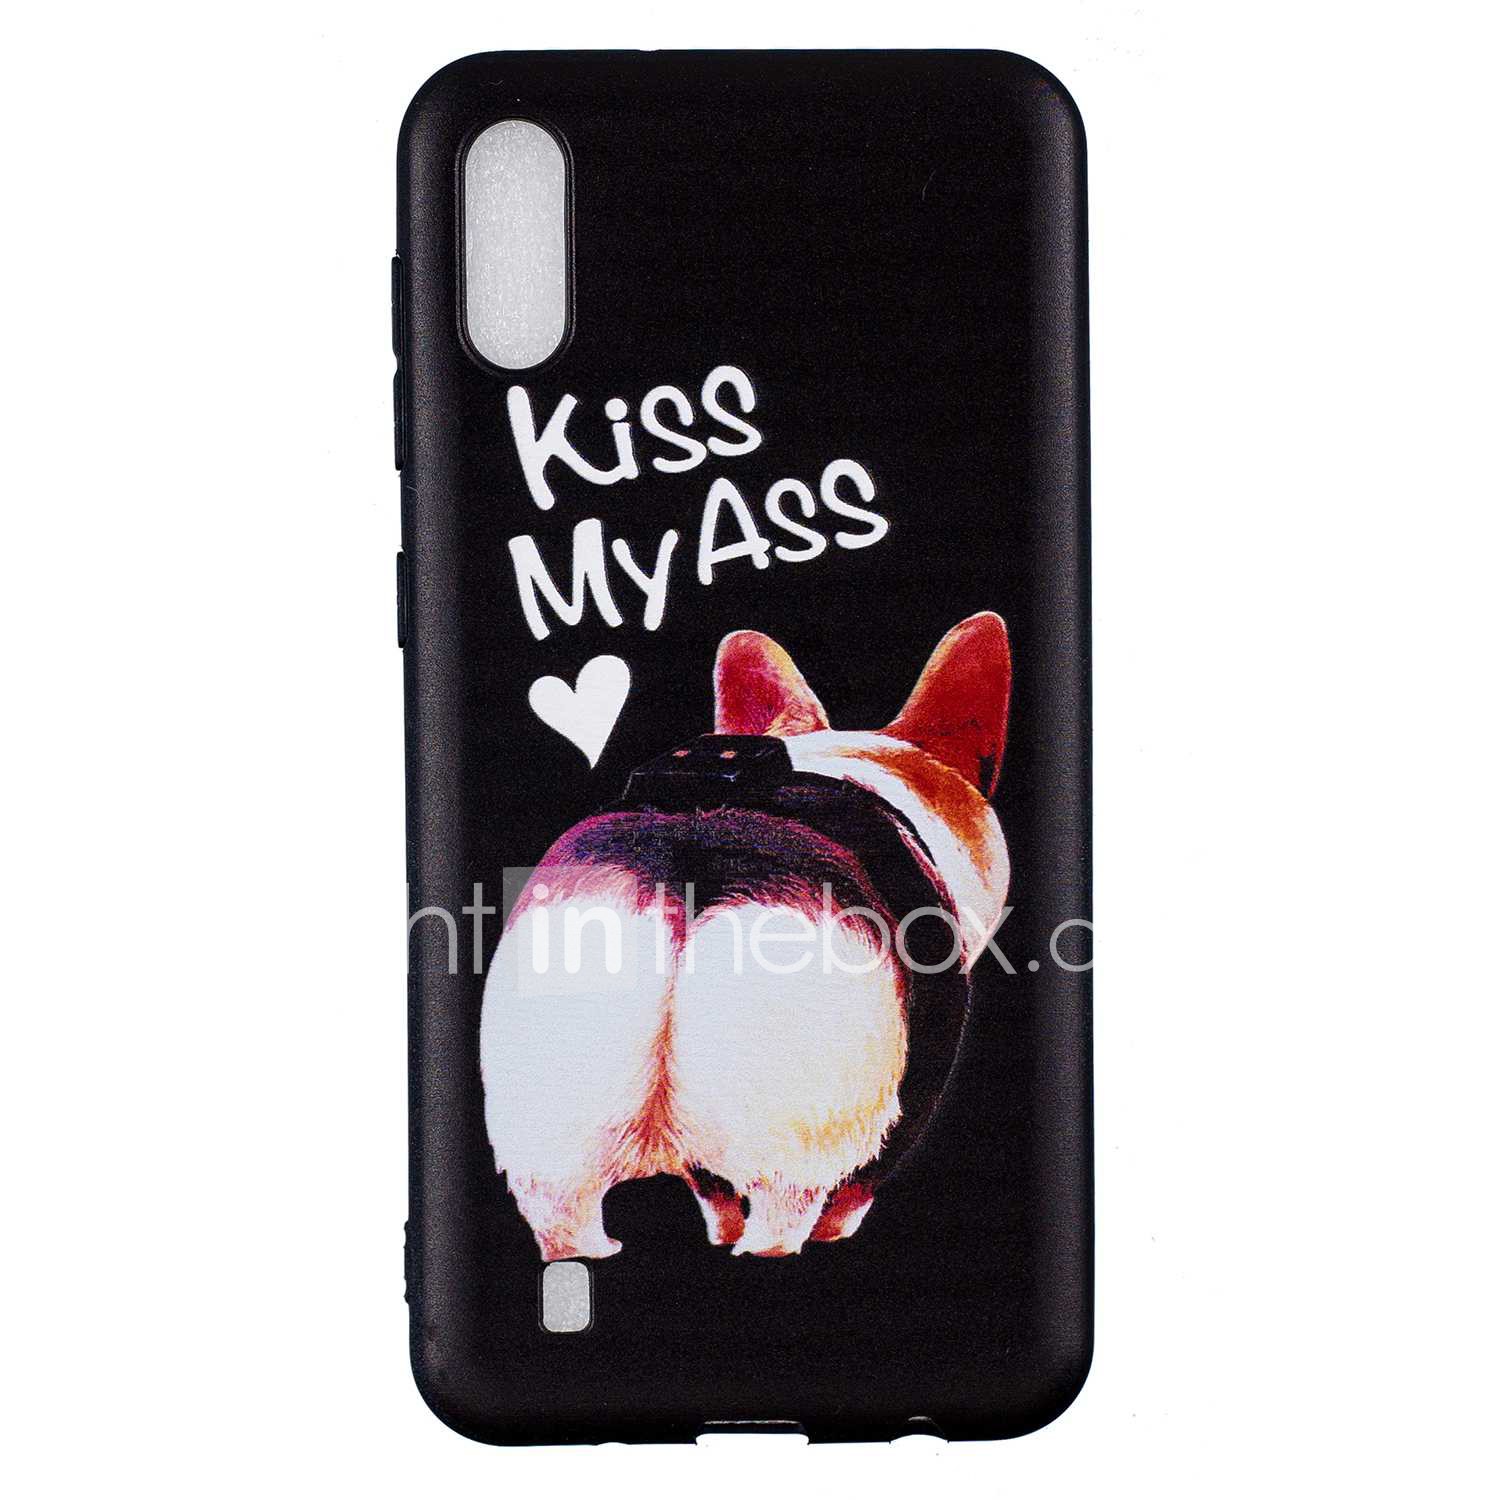 cover samsung j5 2016 sushi